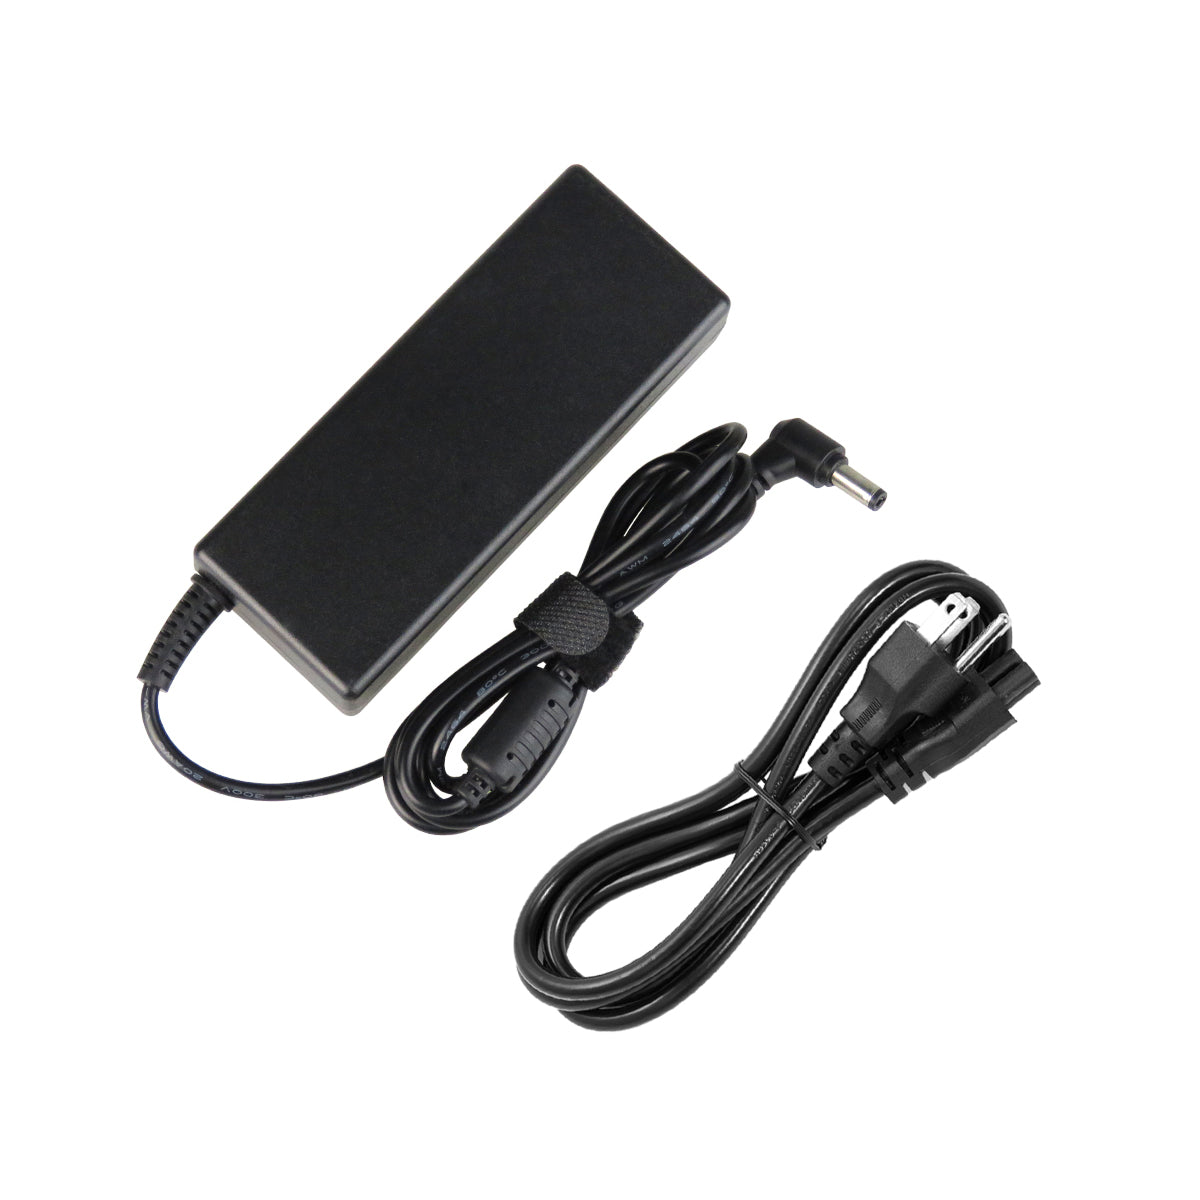 AC Adapter Charger for ASUS K54H Notebook.